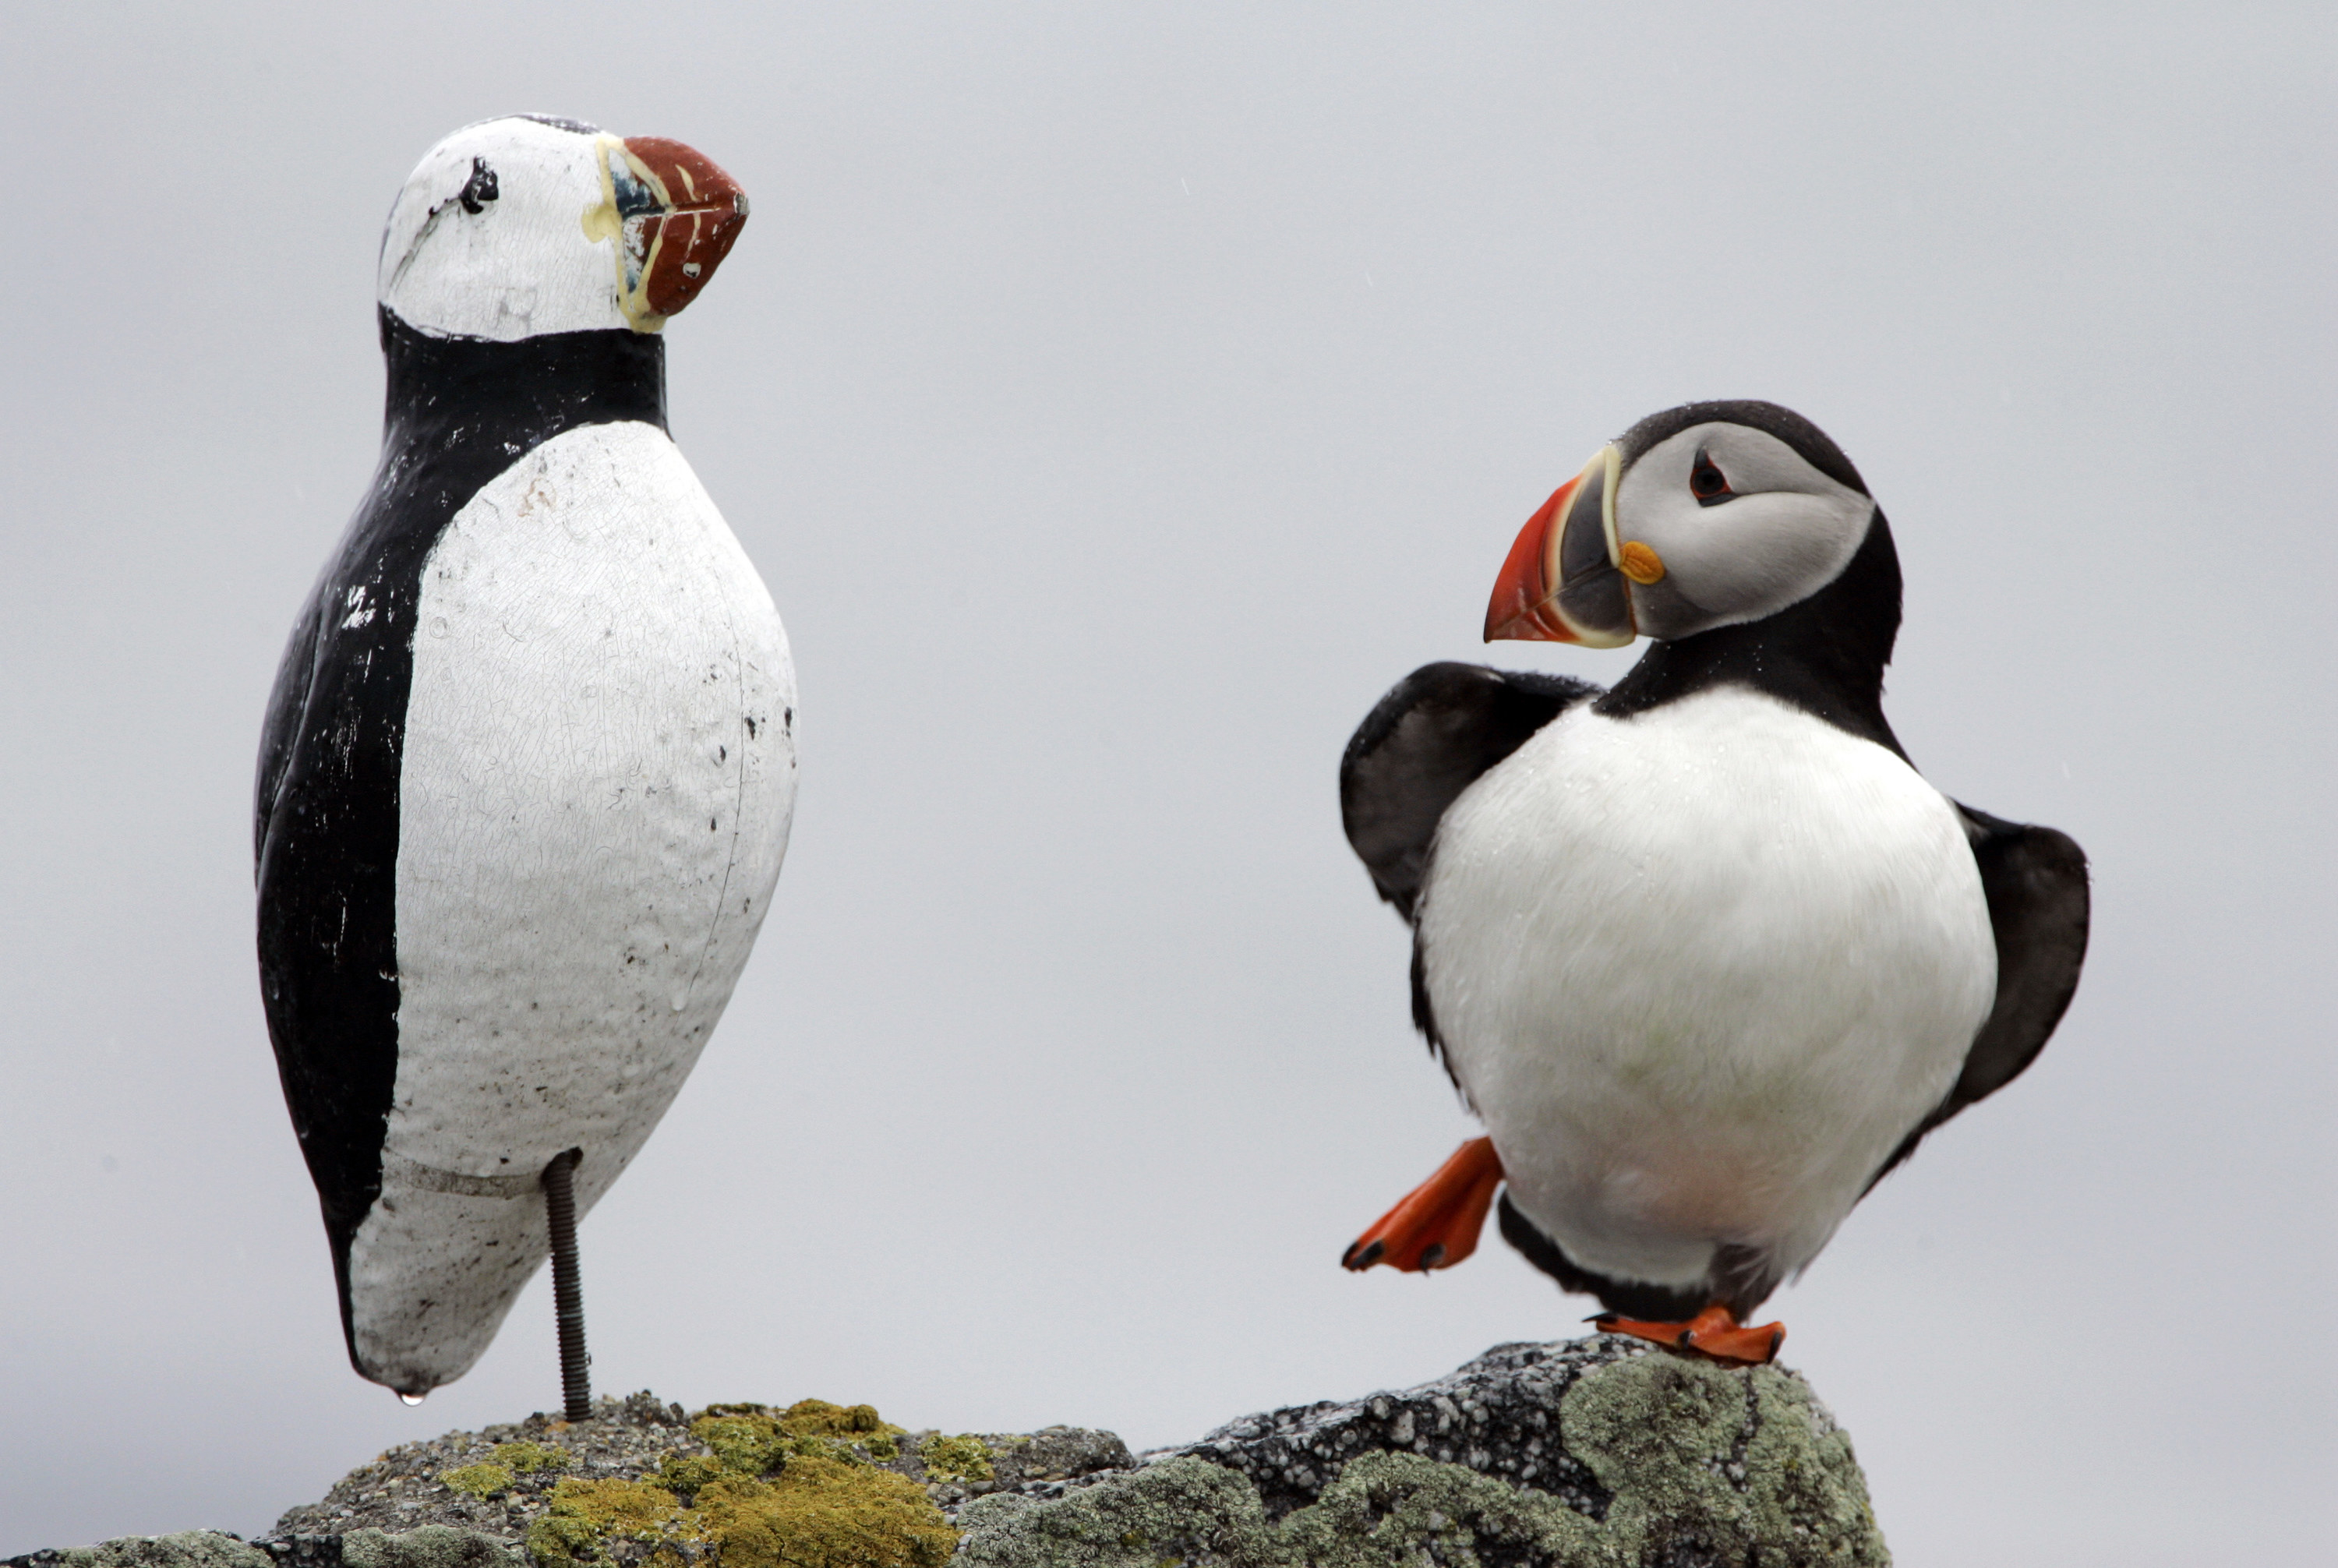 A puffin lifts his leg, just like his new friend, a wooden decoy.